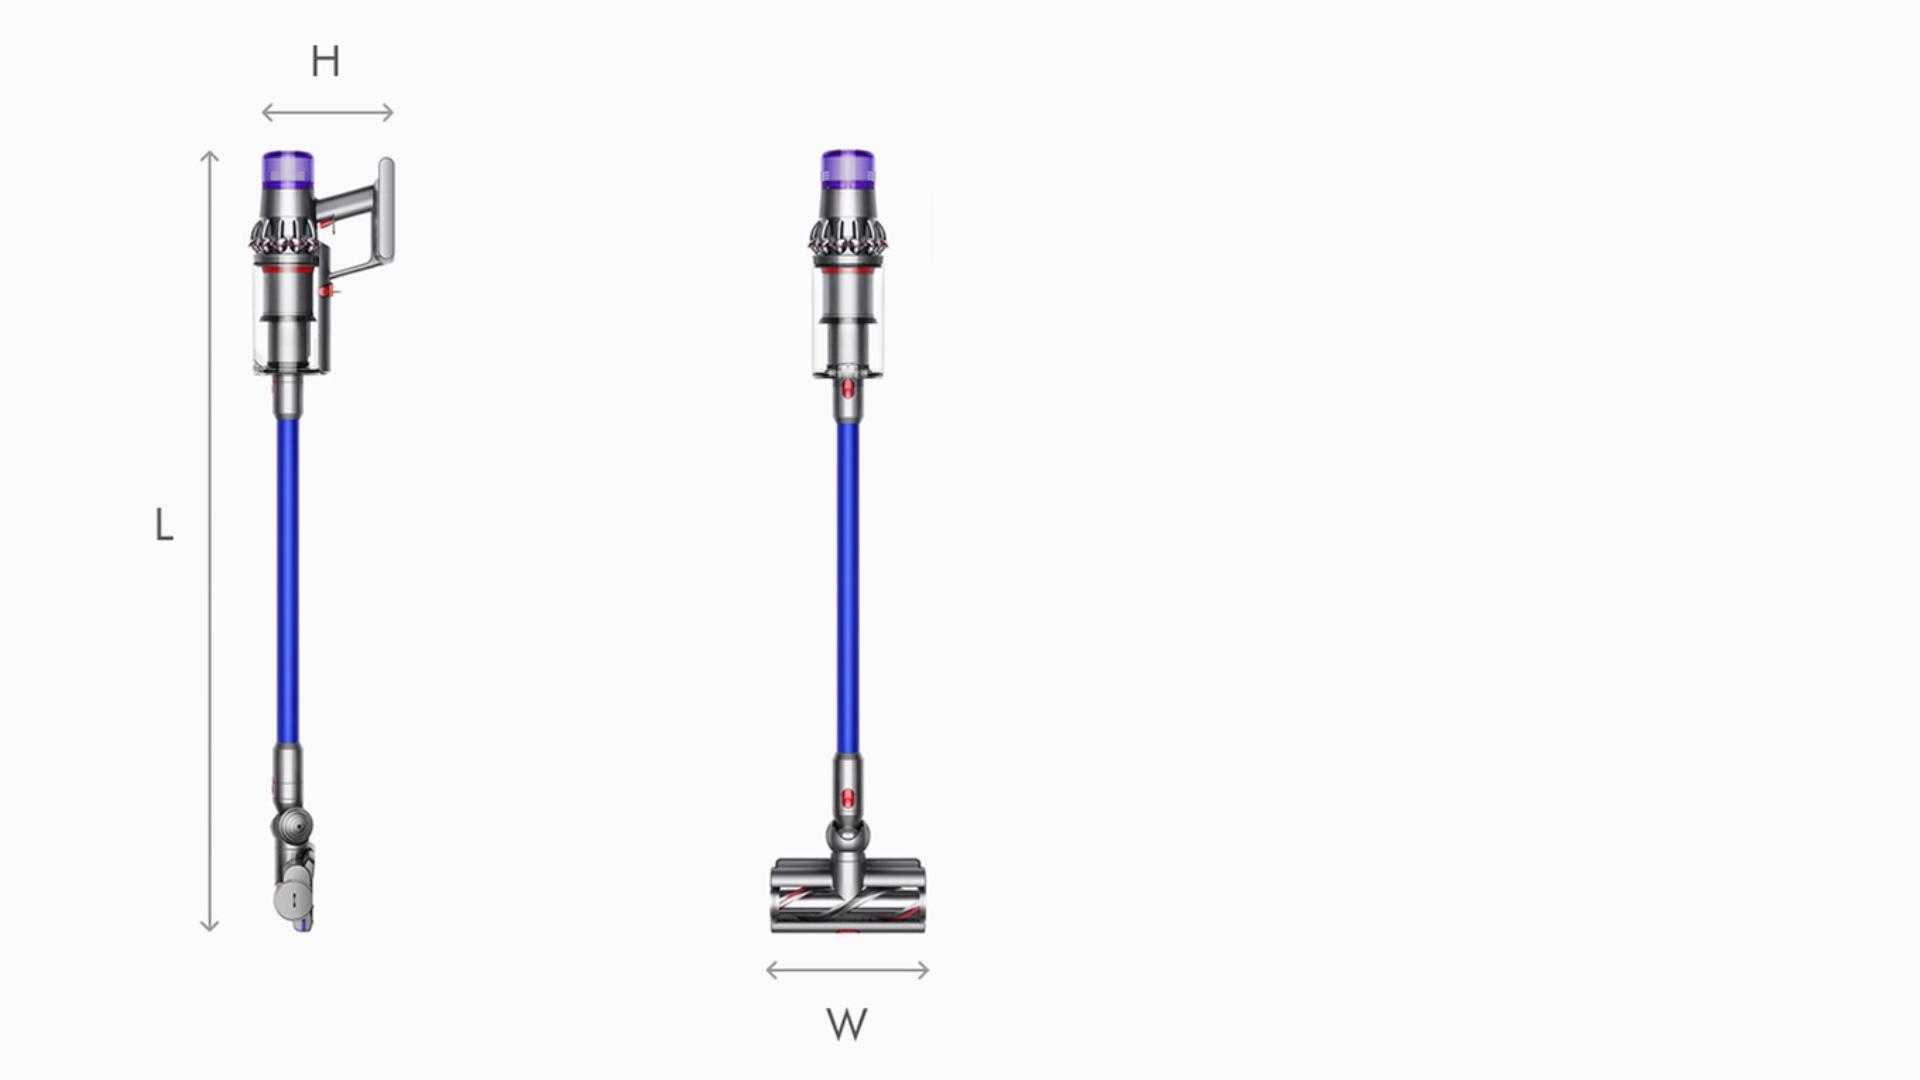 Illustration of Dyson V11 Absolute vaccum cleaner dimensions